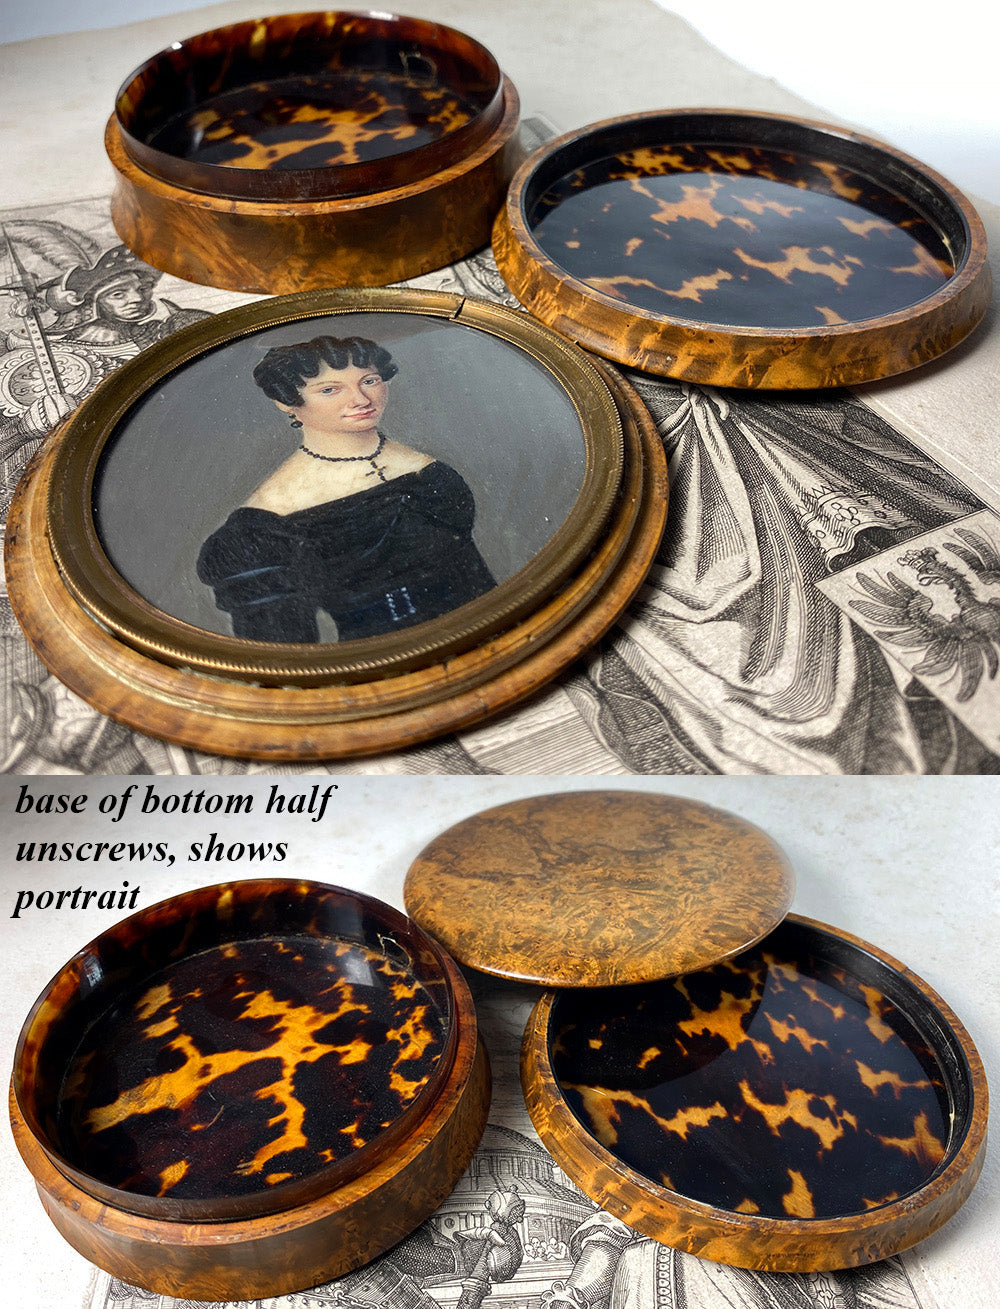 RARE Hidden Portrait Miniature in Antique French Table Snuff Box, Early 19th Century